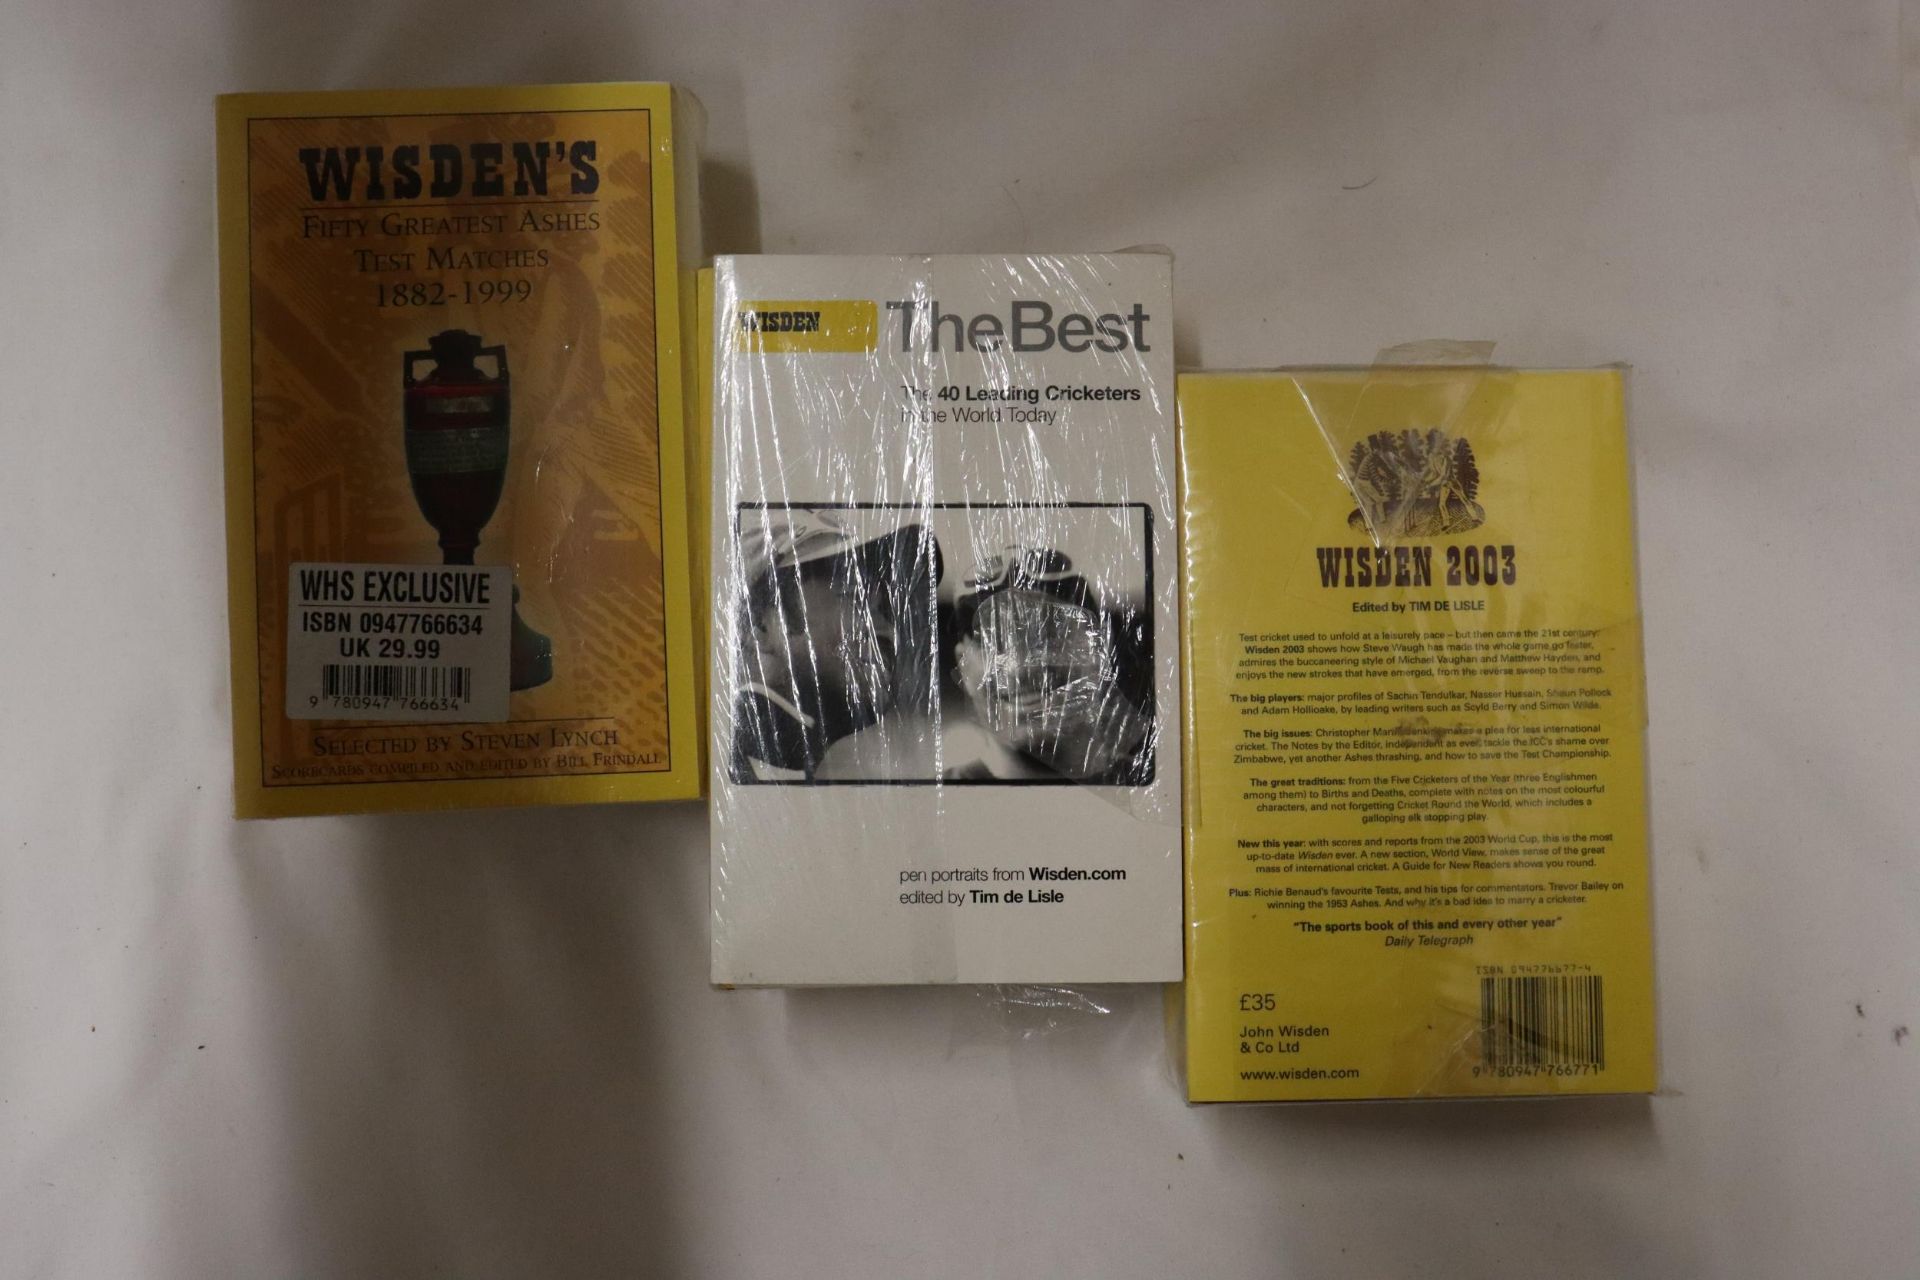 THREE HARDBACK COPIES OF WISDEN'S CRICKETER'S ALMANACKS, 2001, 2002 AND 2003. THESE COPIES ARE IN - Image 2 of 3